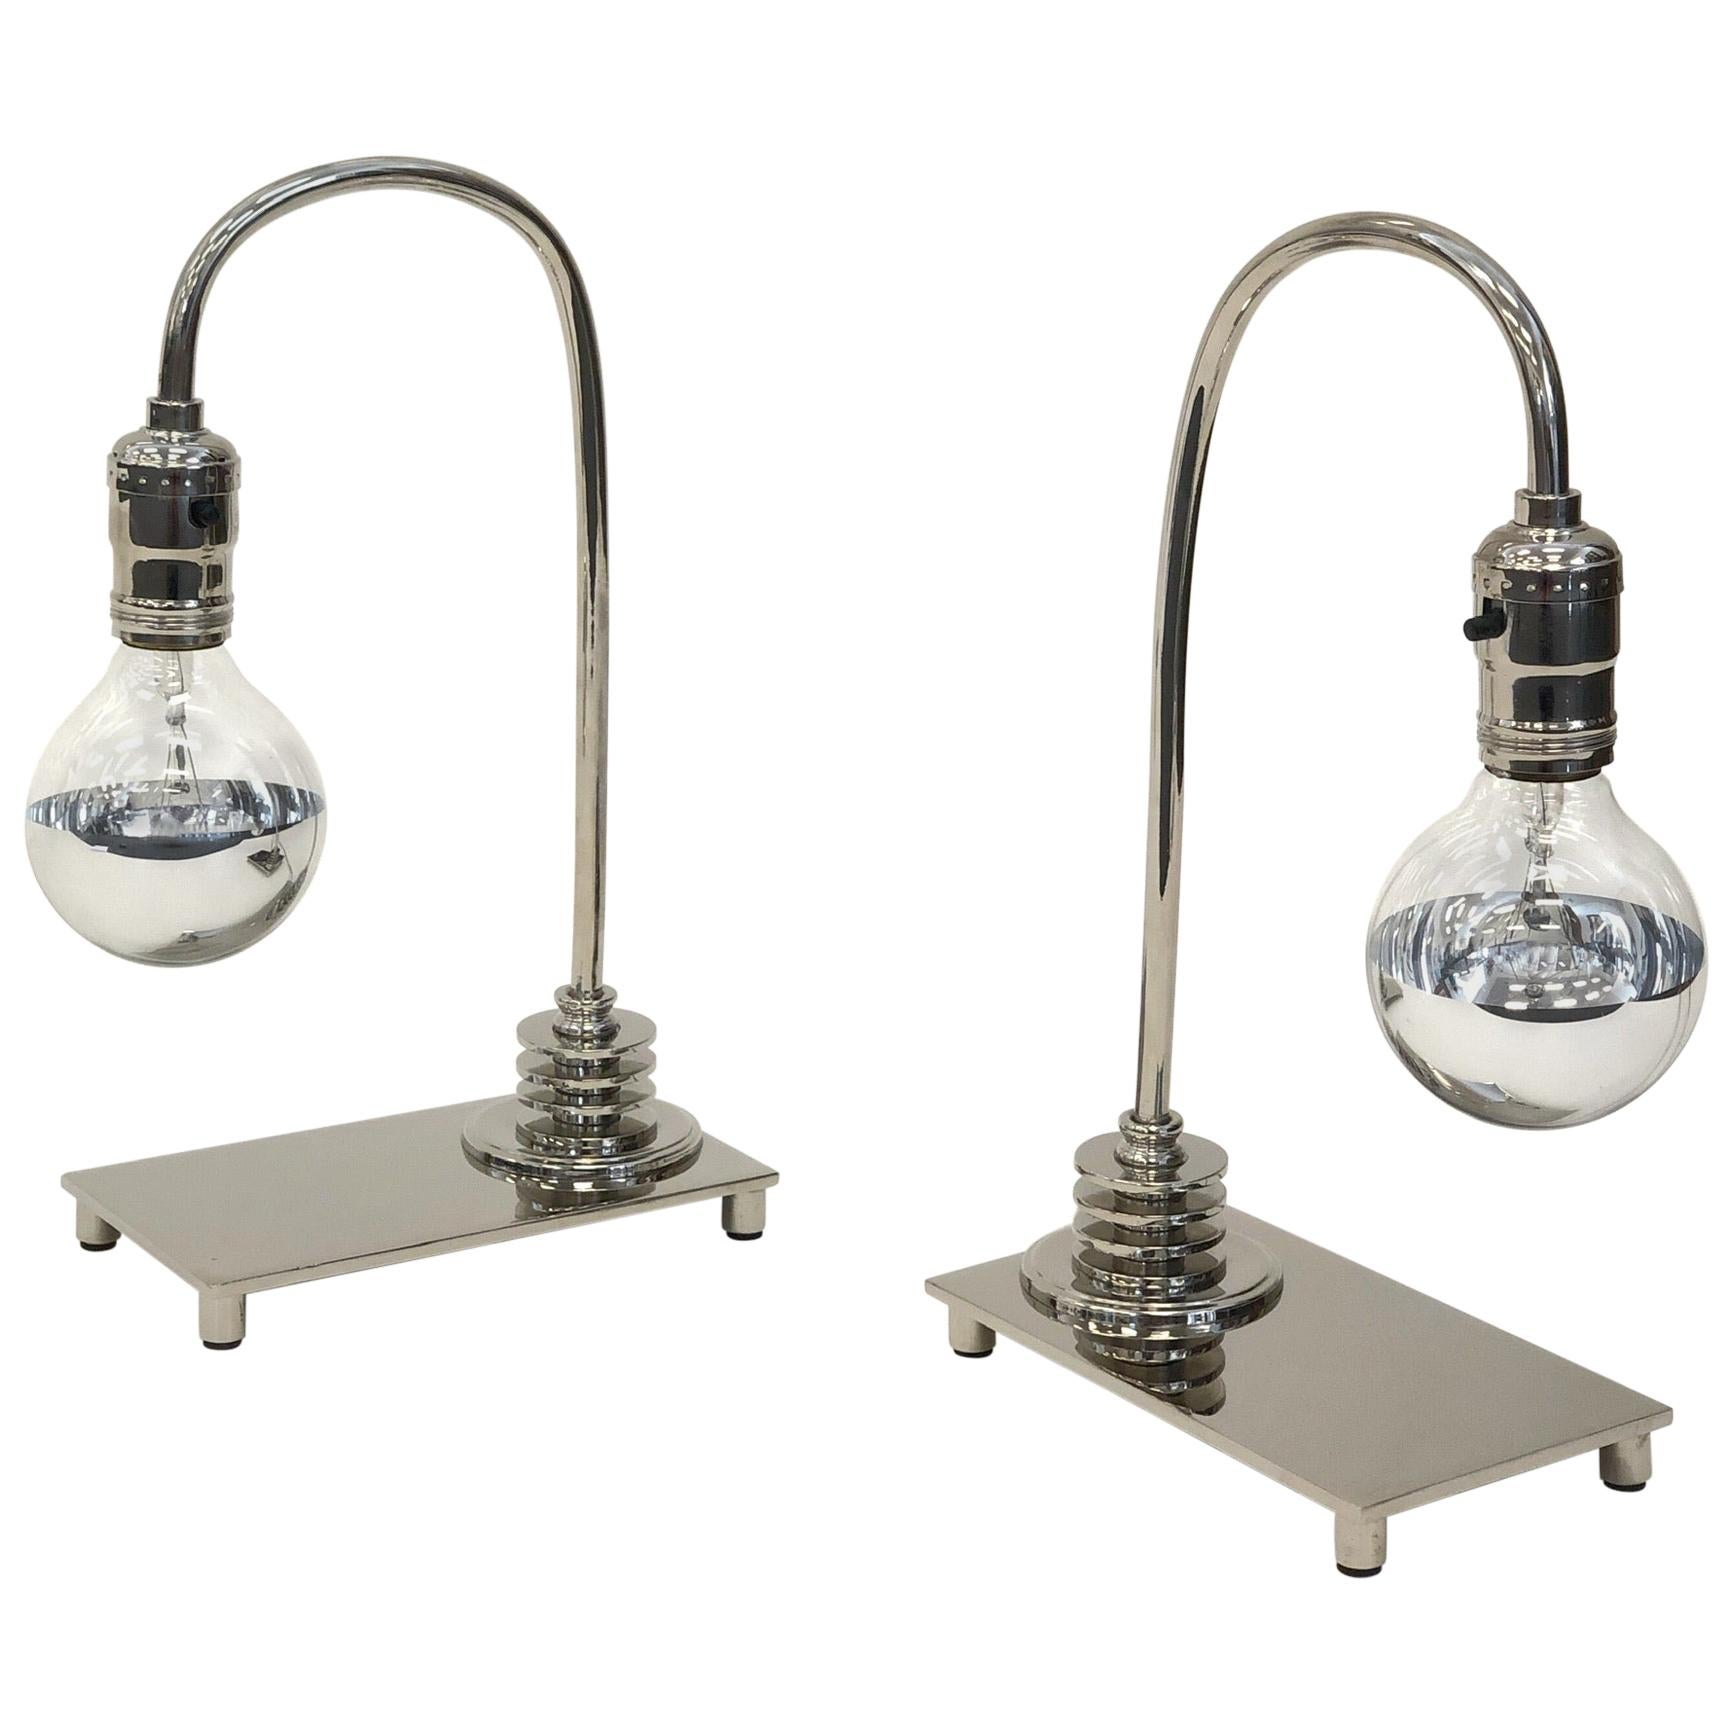 Pair of Polished Nickel Art Deco Table Lamps